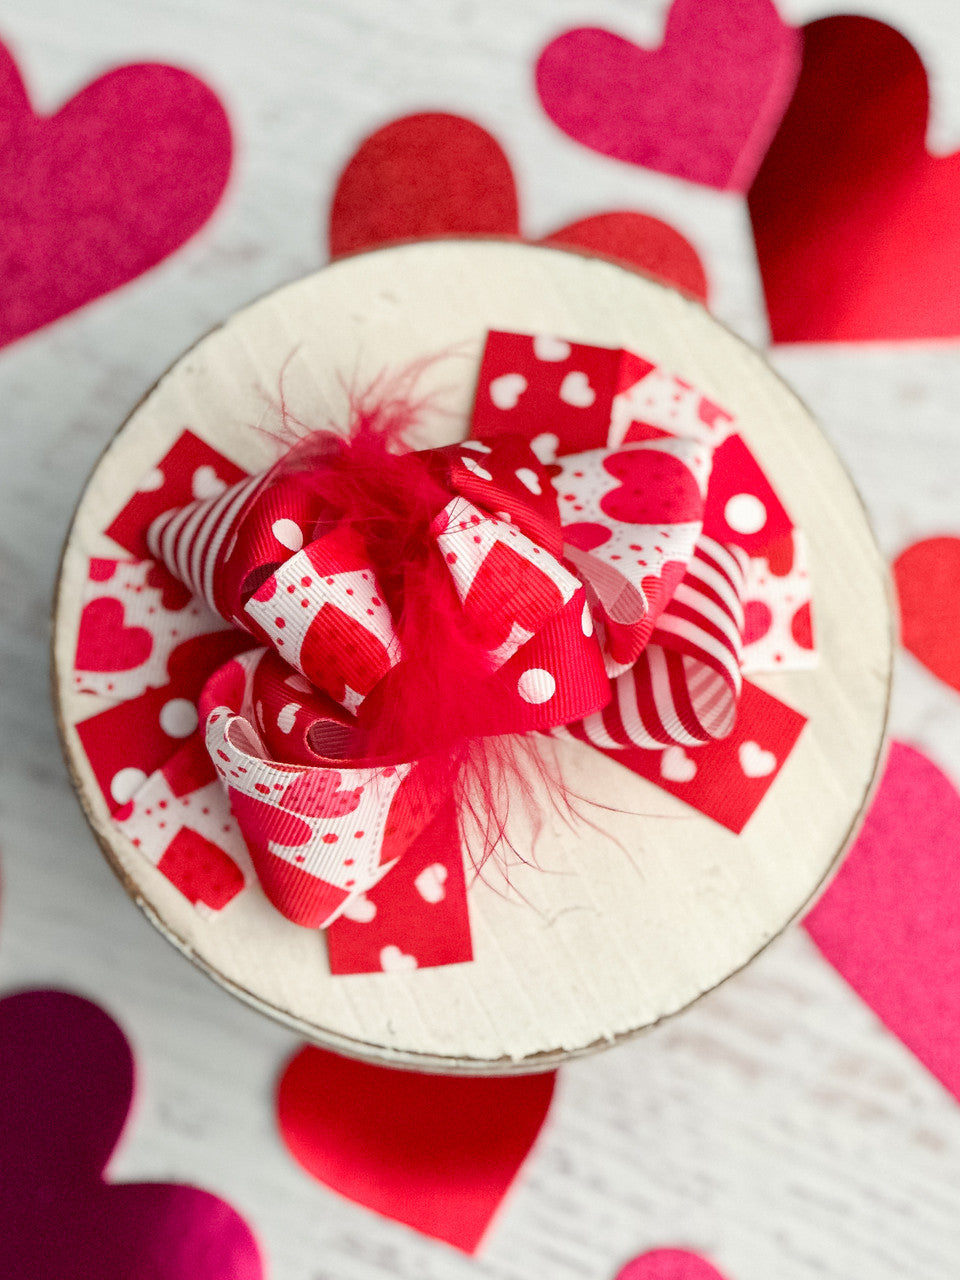 Hearts, stripes, and polka dots on 1-1.5" grosgrain ribbon loop around a fluffy red marabou puff to create this fun Valentine's Day hair bow.